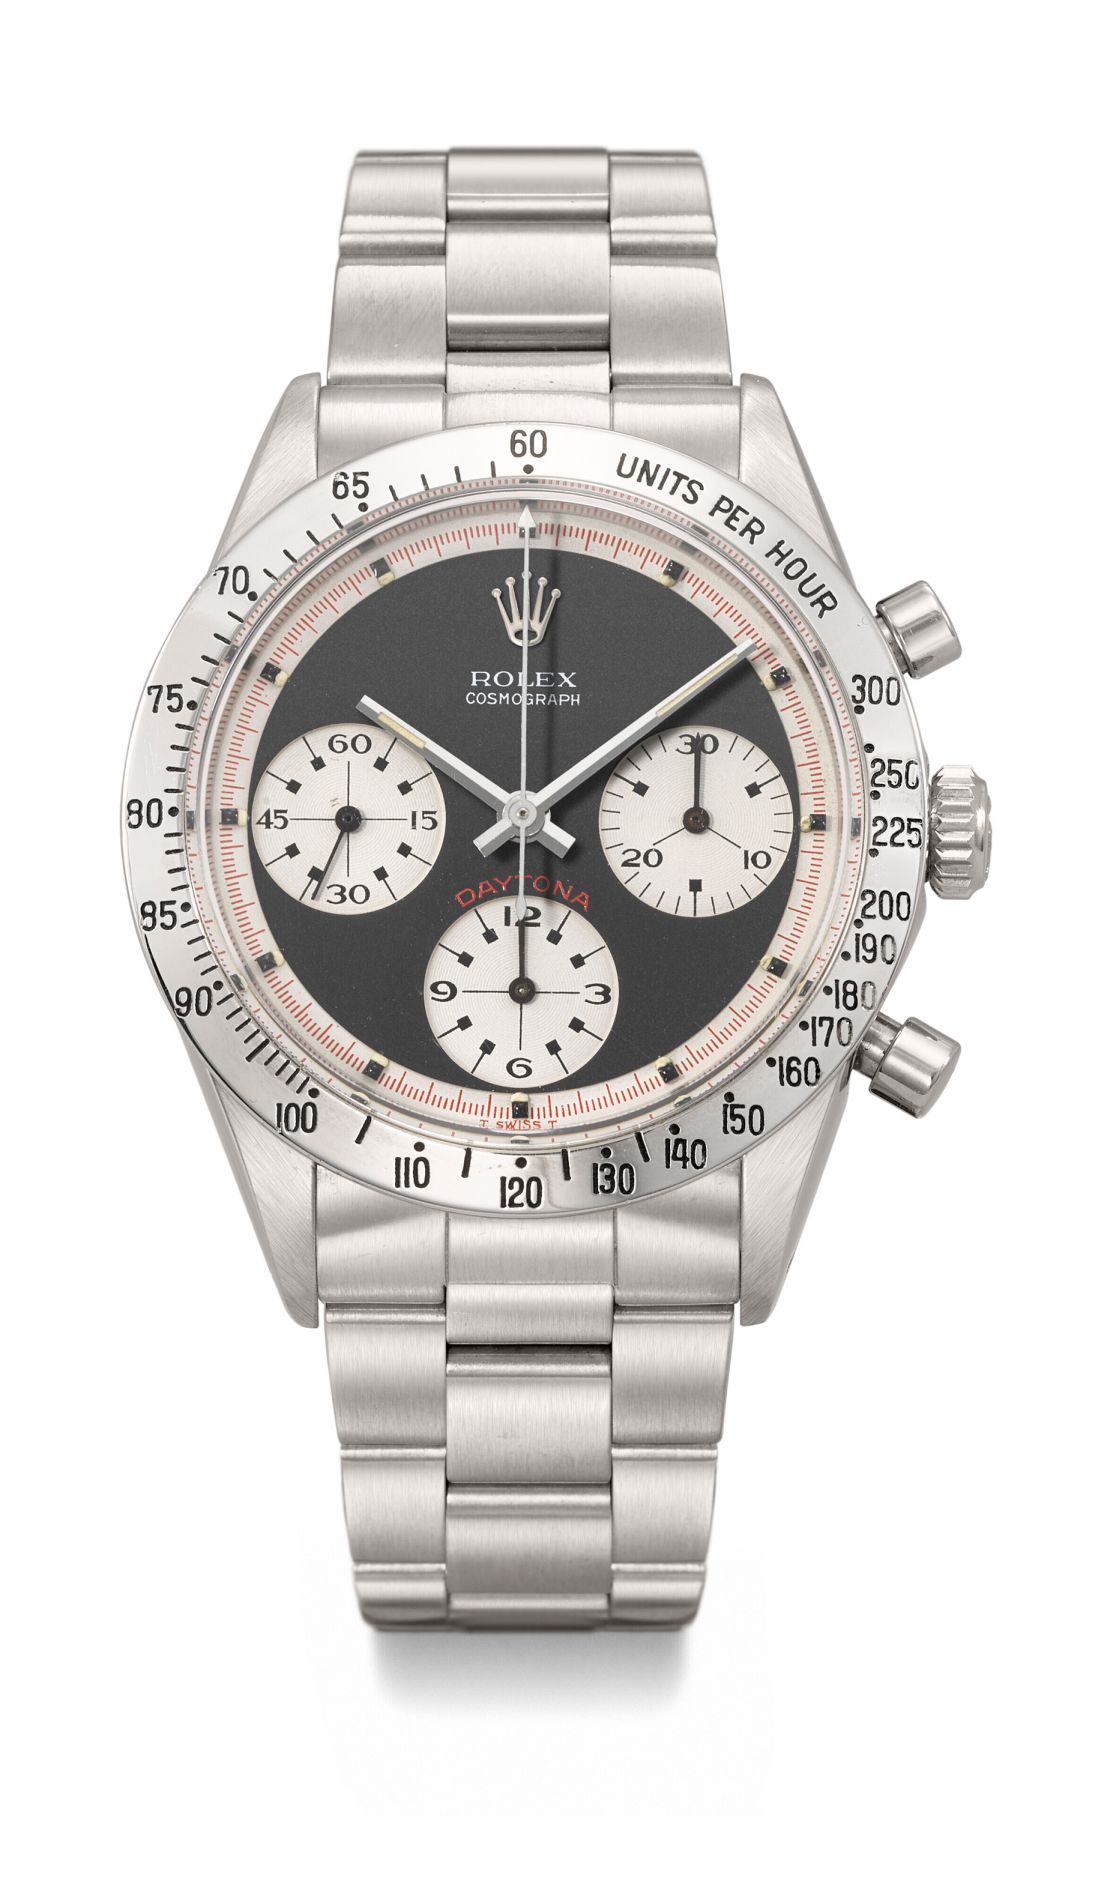 The Rolex stainless steel Paul Newman Daytona watch was named after the Daytona International Speedway in Florida, according to auction house Christie's head of Watches Remi Guillemin.